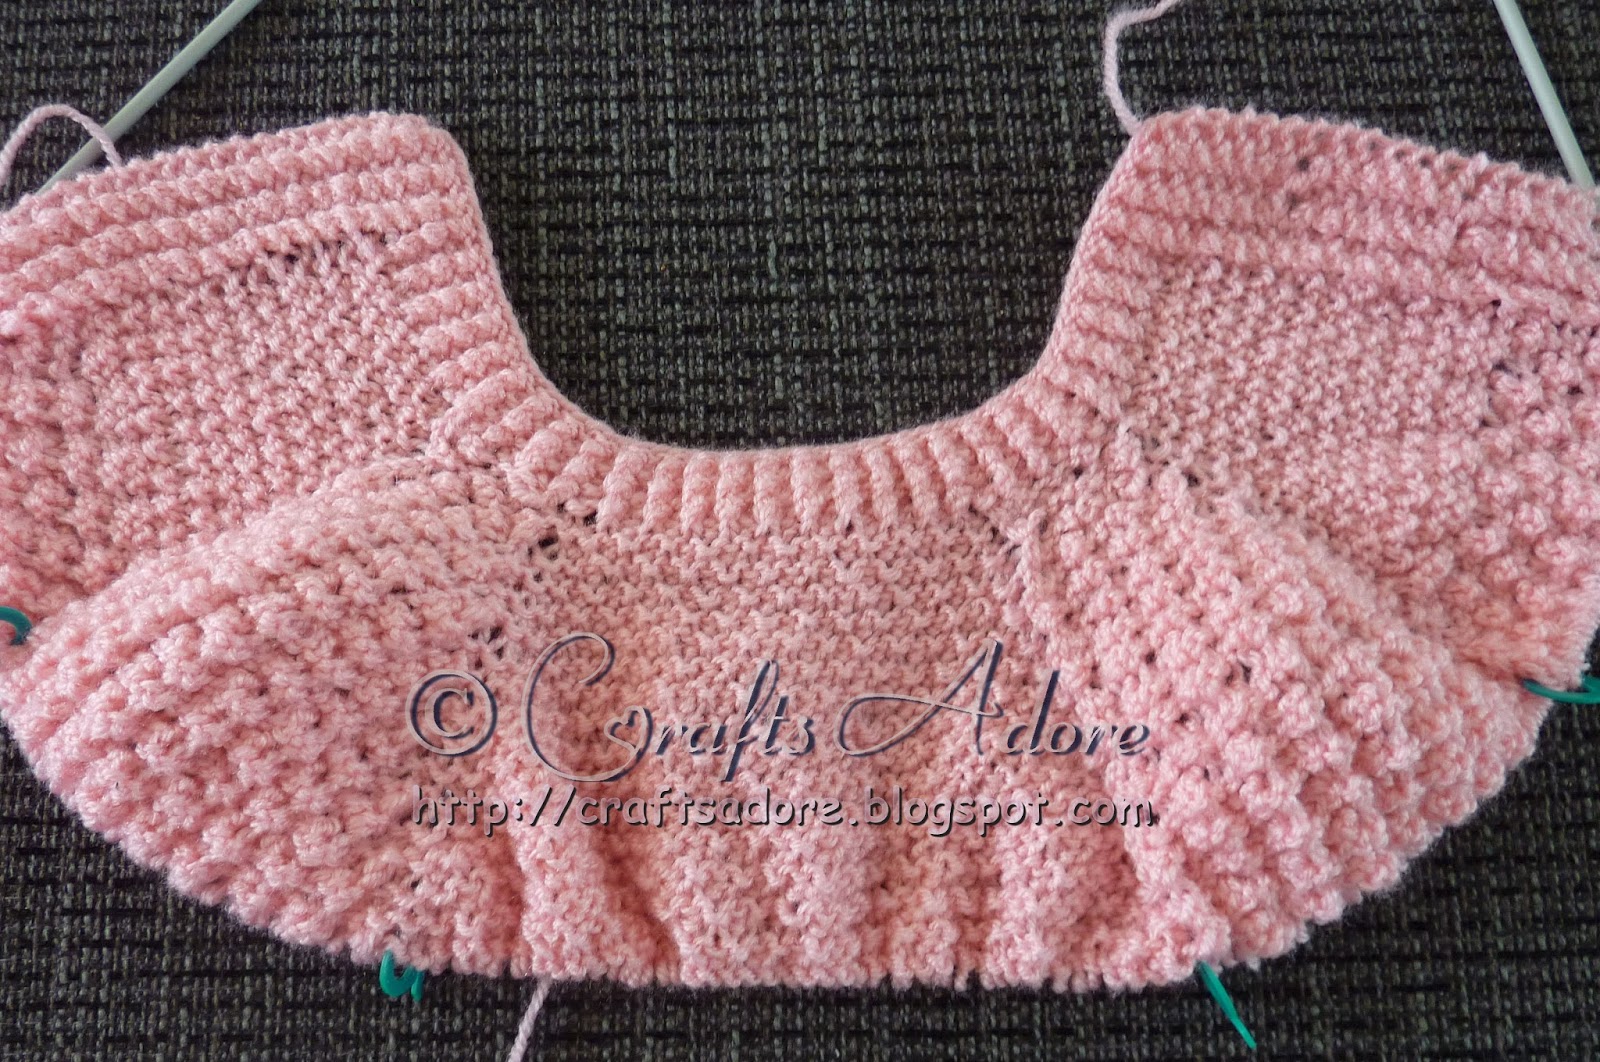 CraftsAdore Knitted Baby Girl Layette Free Knitting Pattern